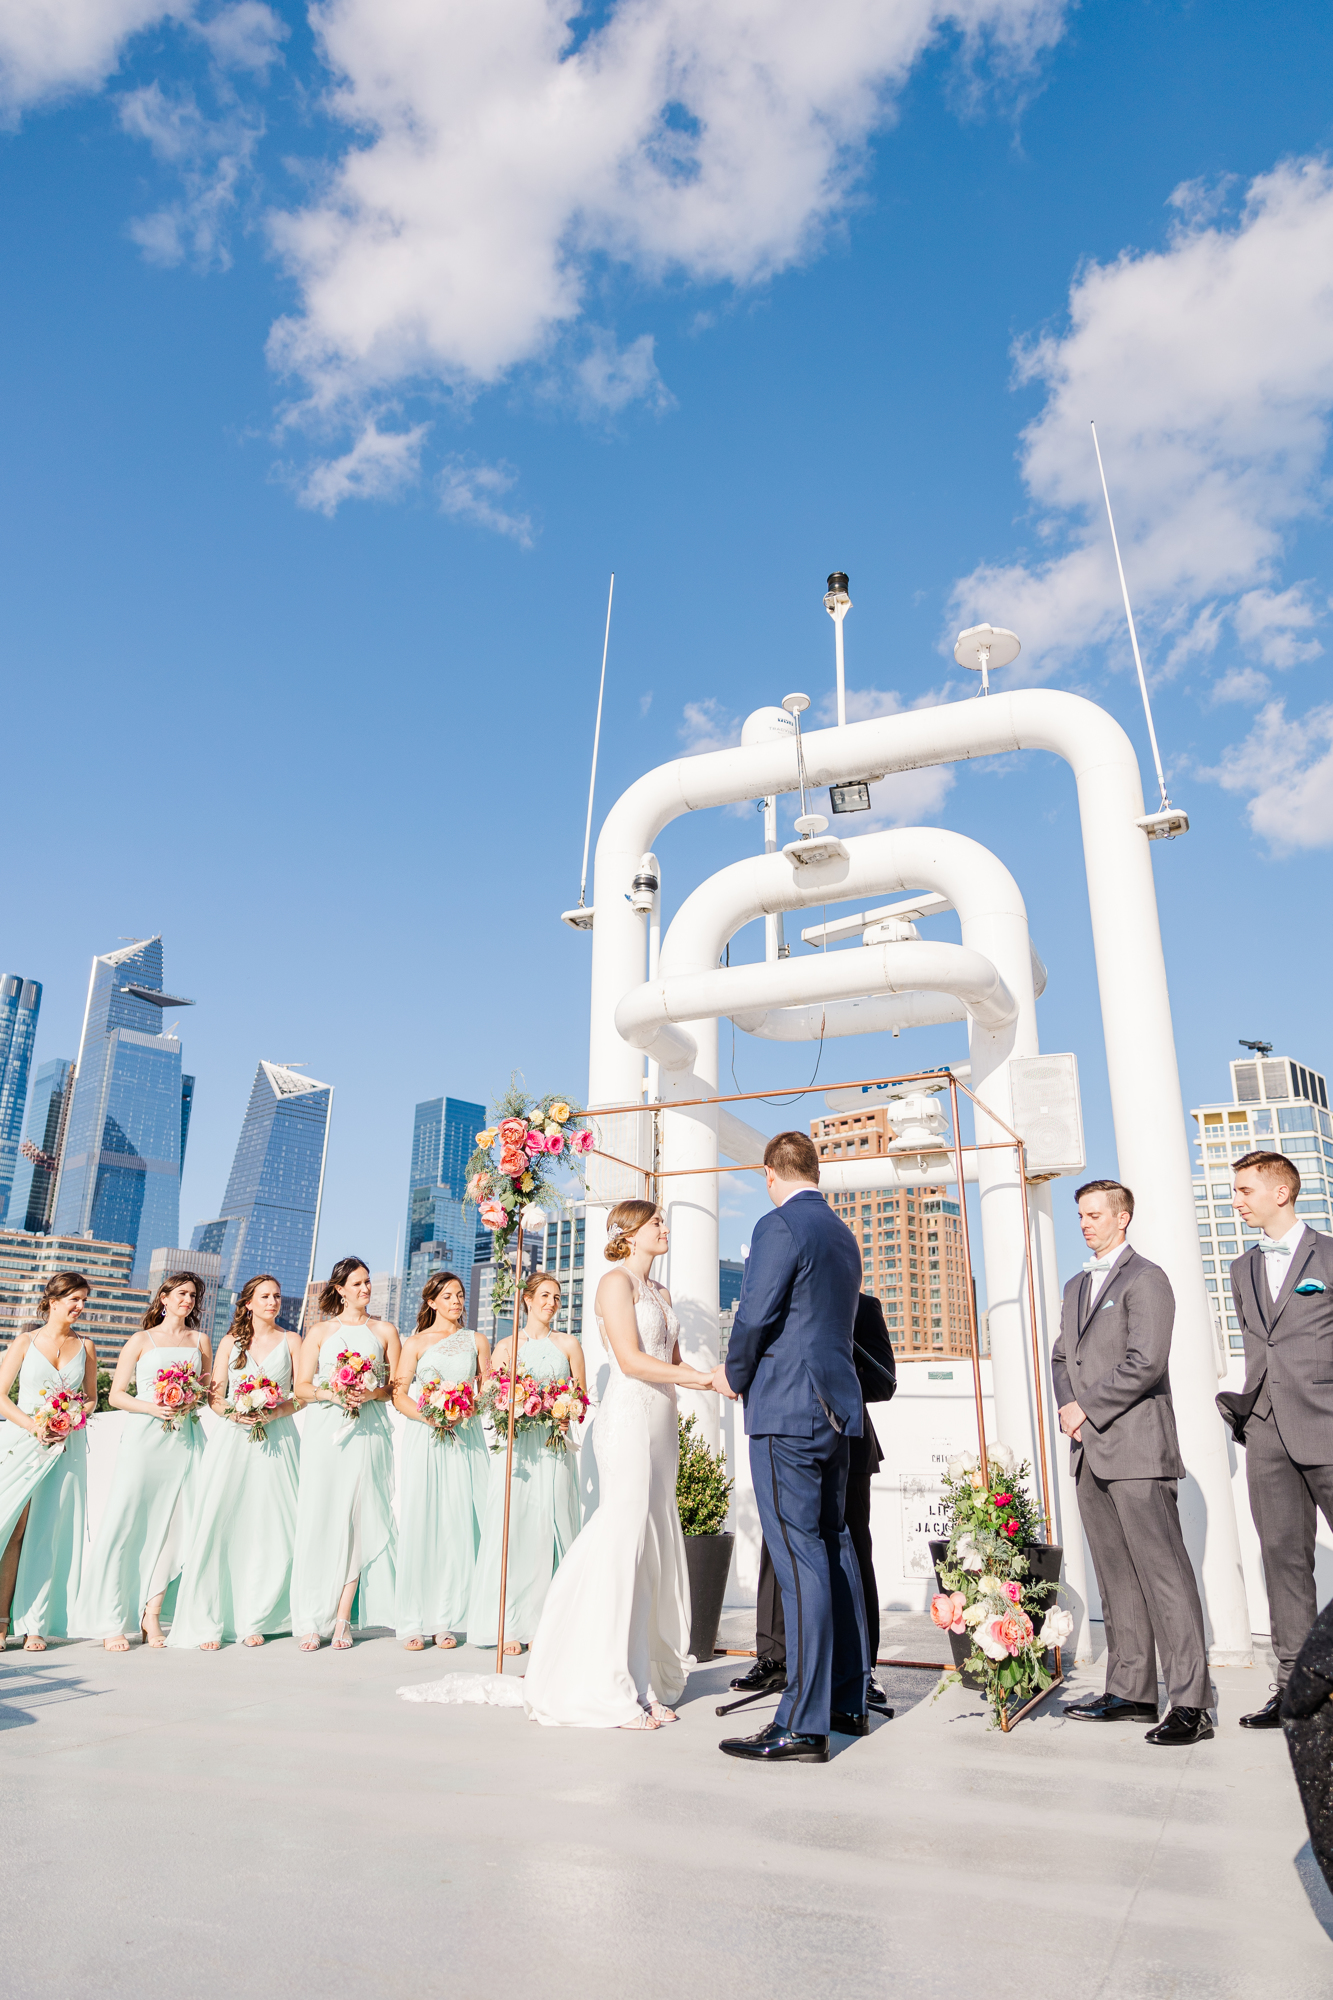 Stunning Wedding Photography in New York City on a Boat